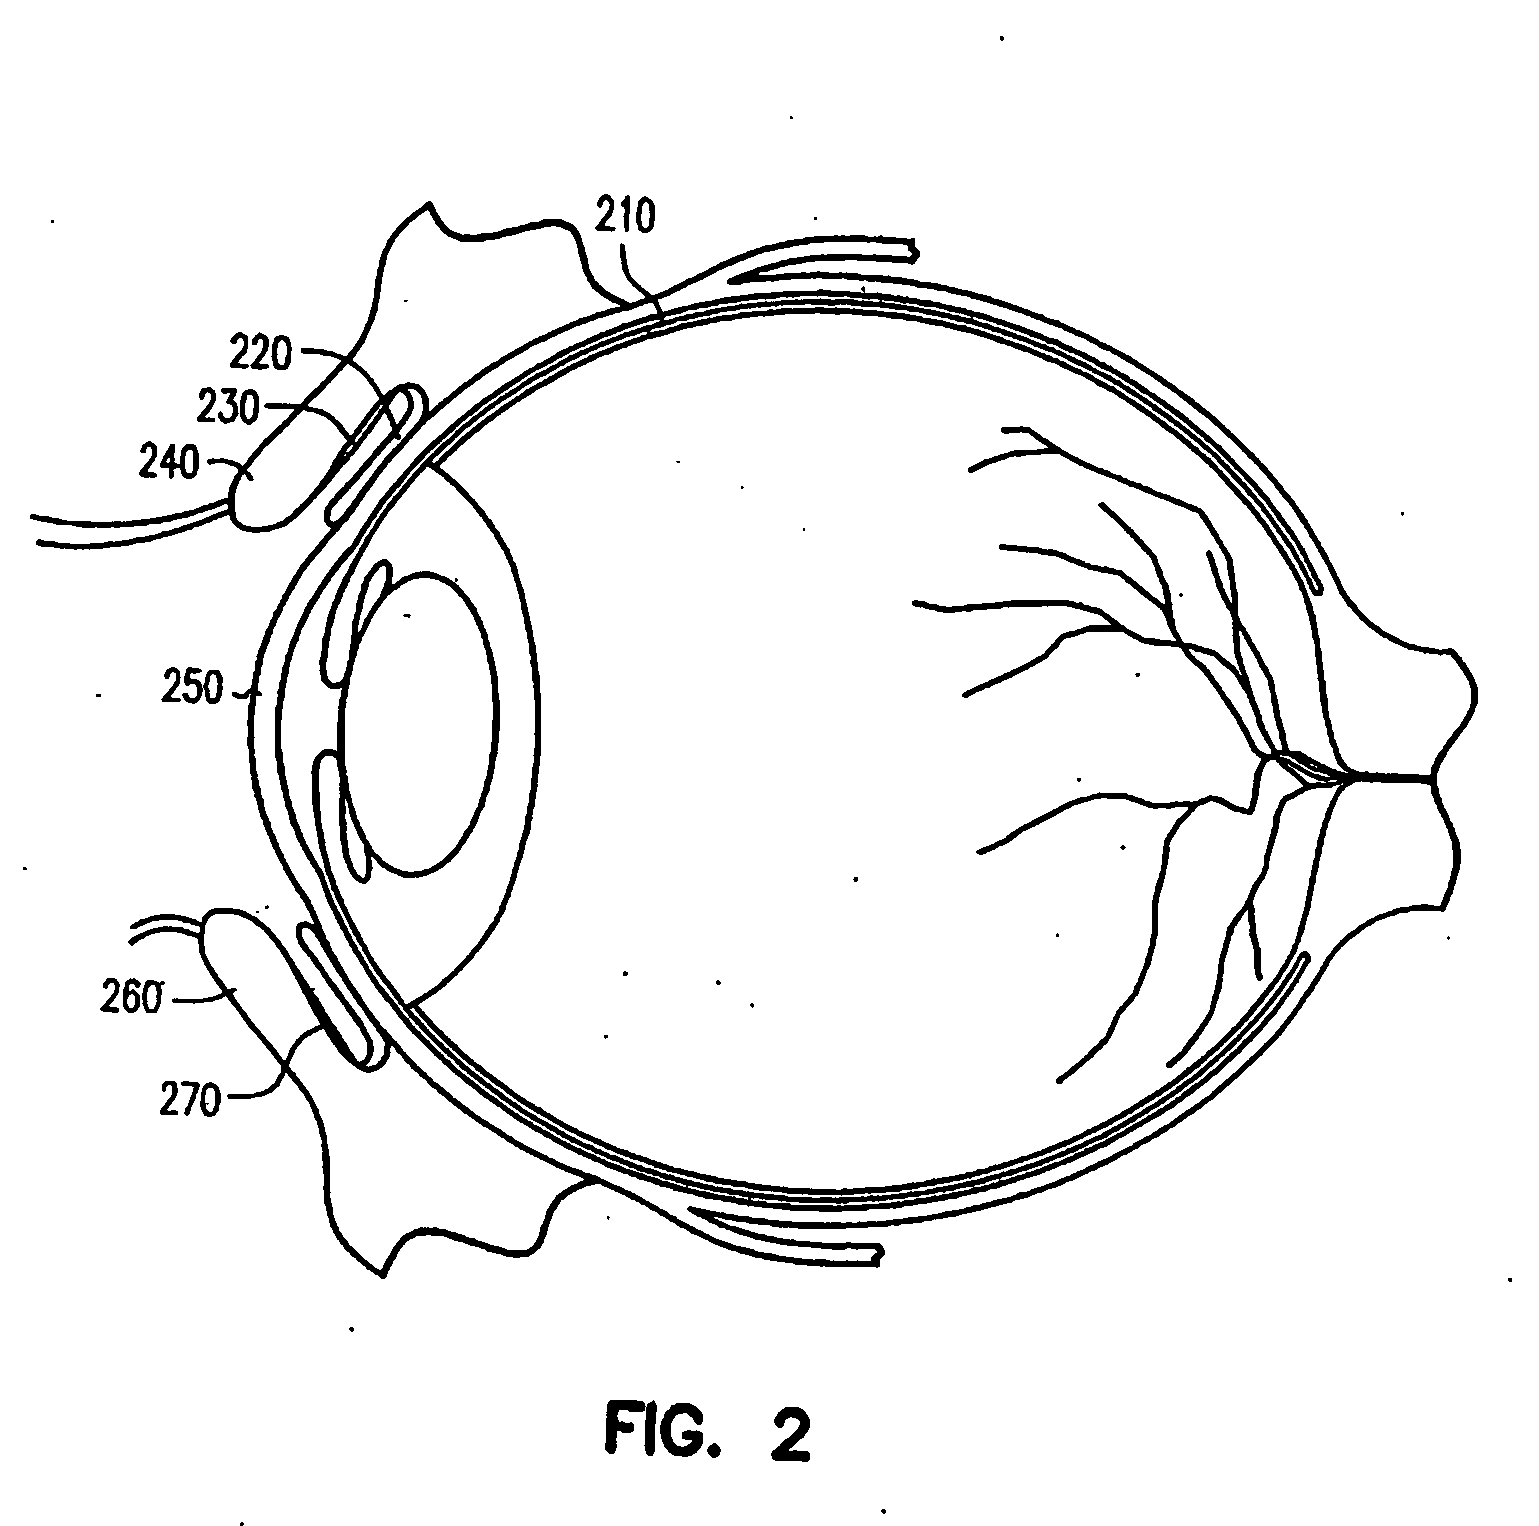 Ocular delivery of polymeric delivery formulations